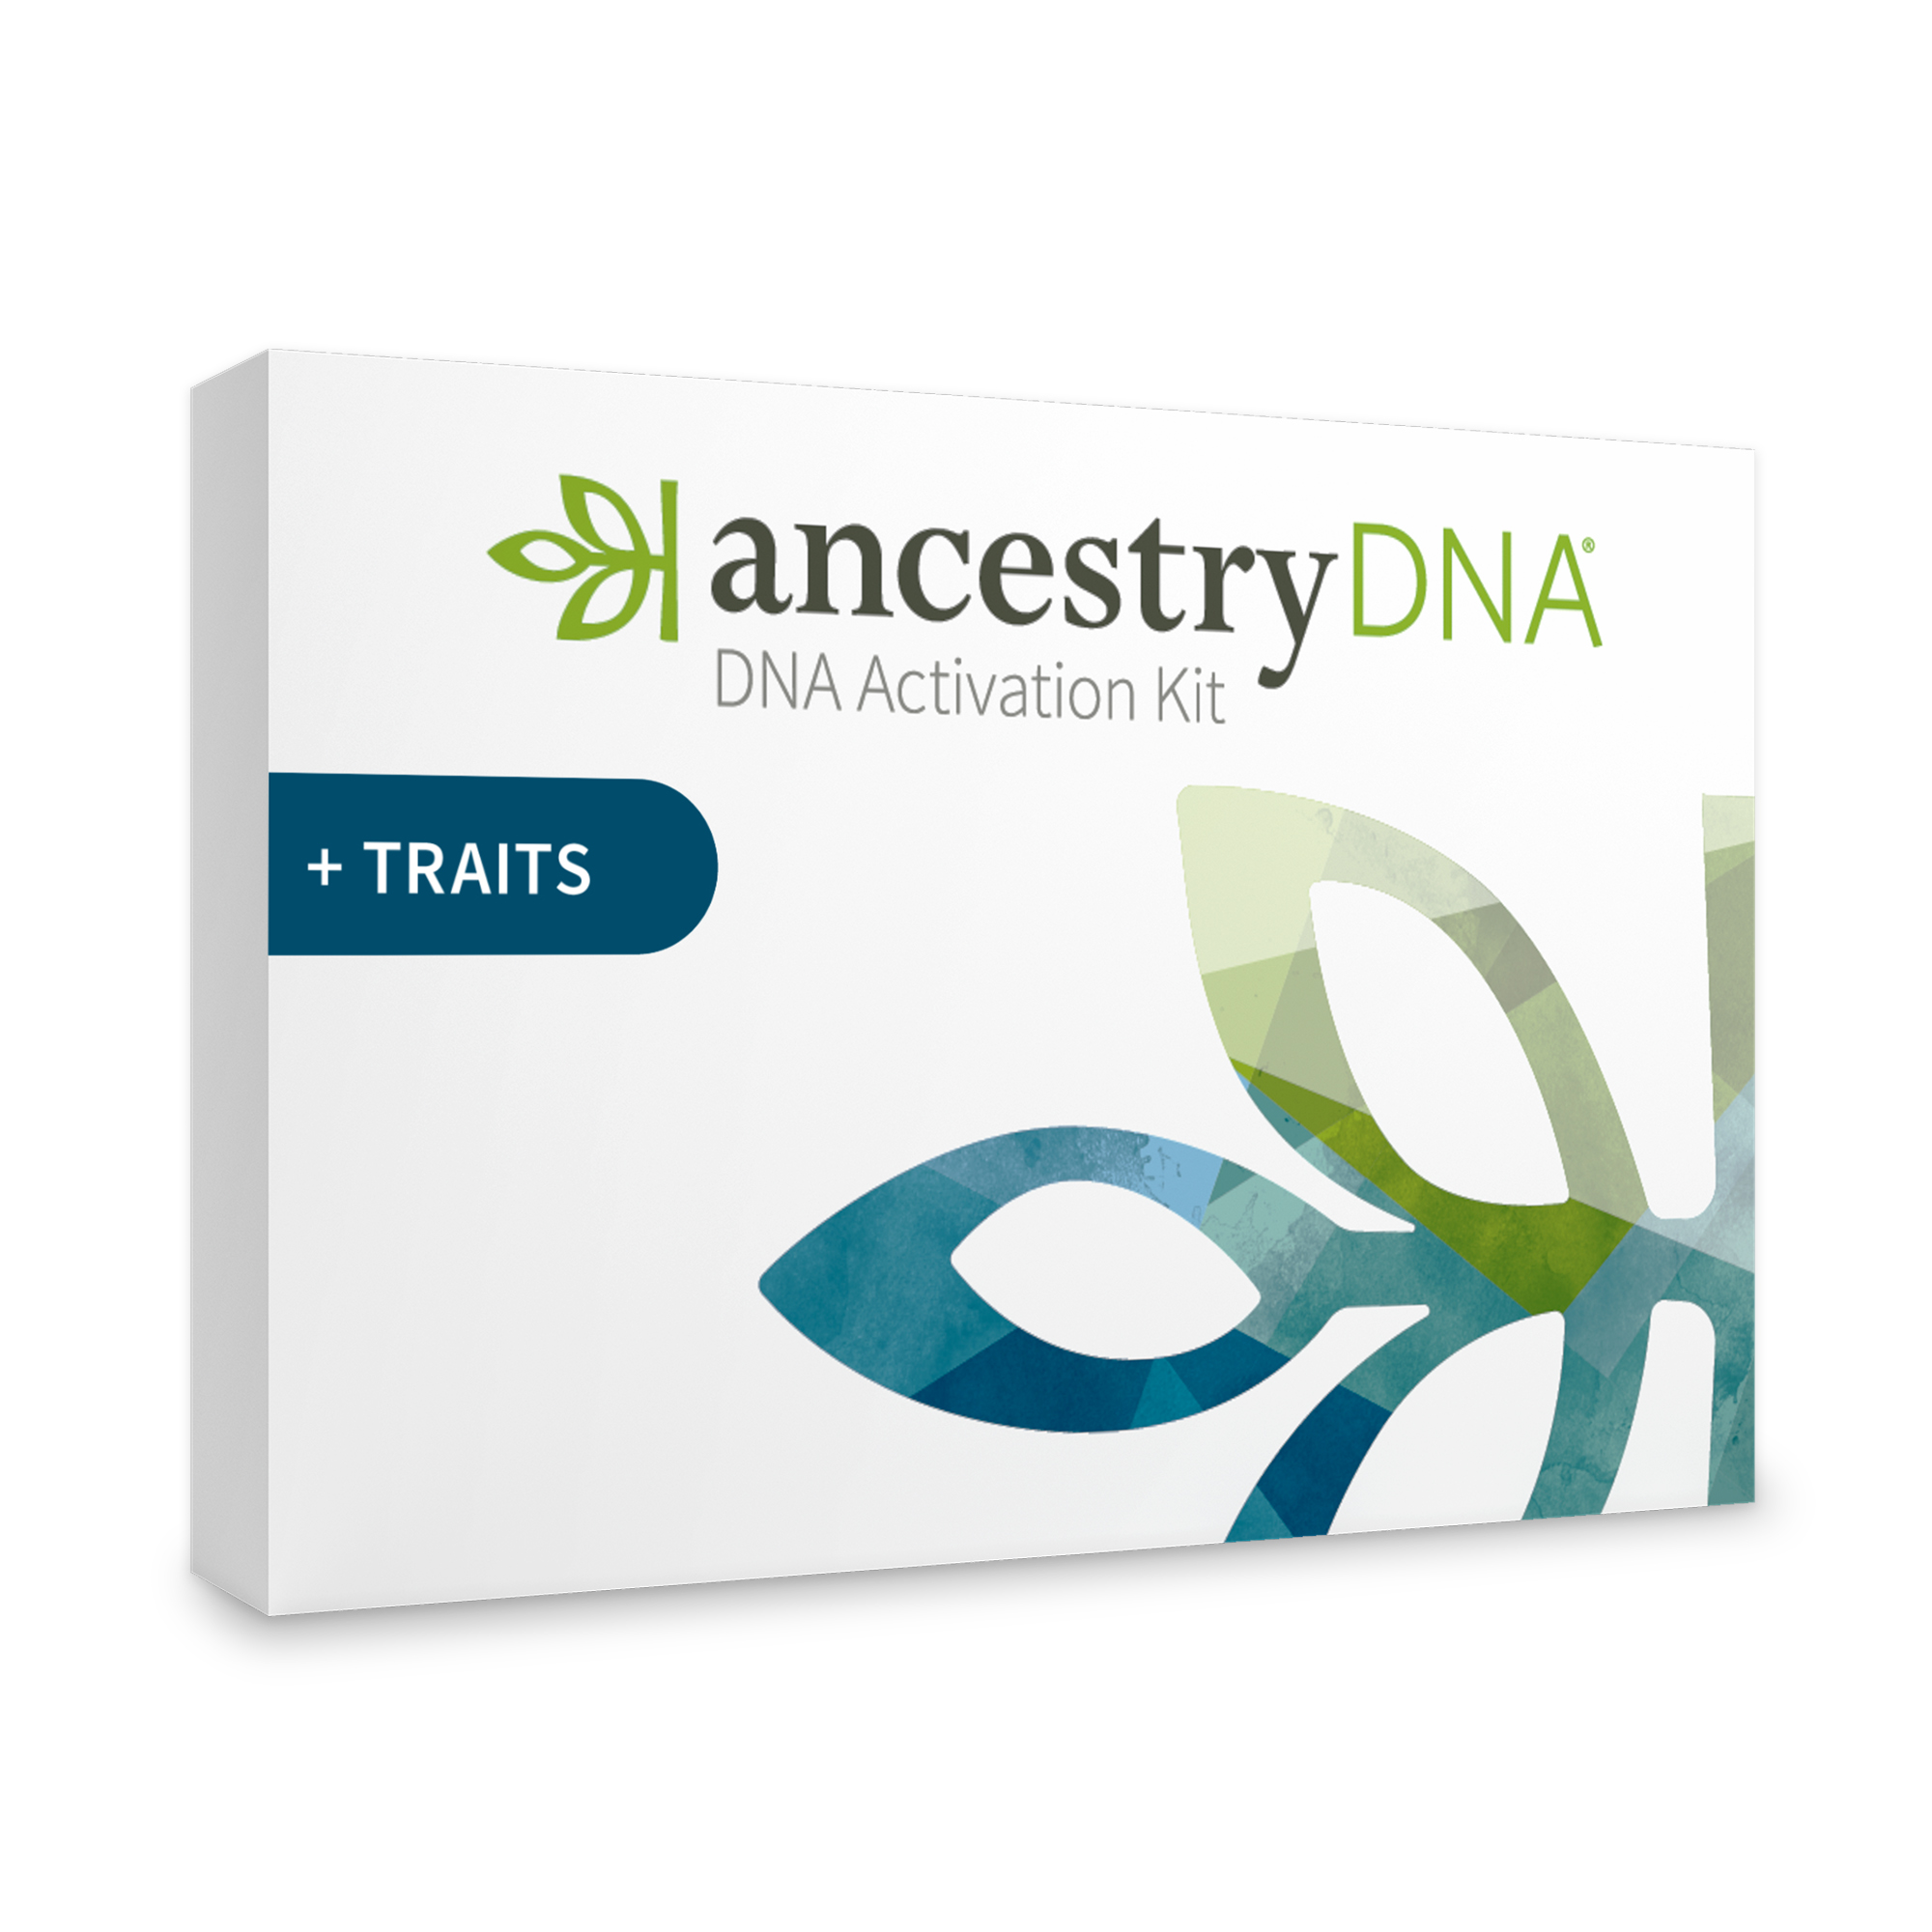 AncestryDNA + Traits: Genetic + Traits Test, Testing Kit with 35+ Genetic Traits, DNA Test Kit - image 1 of 8